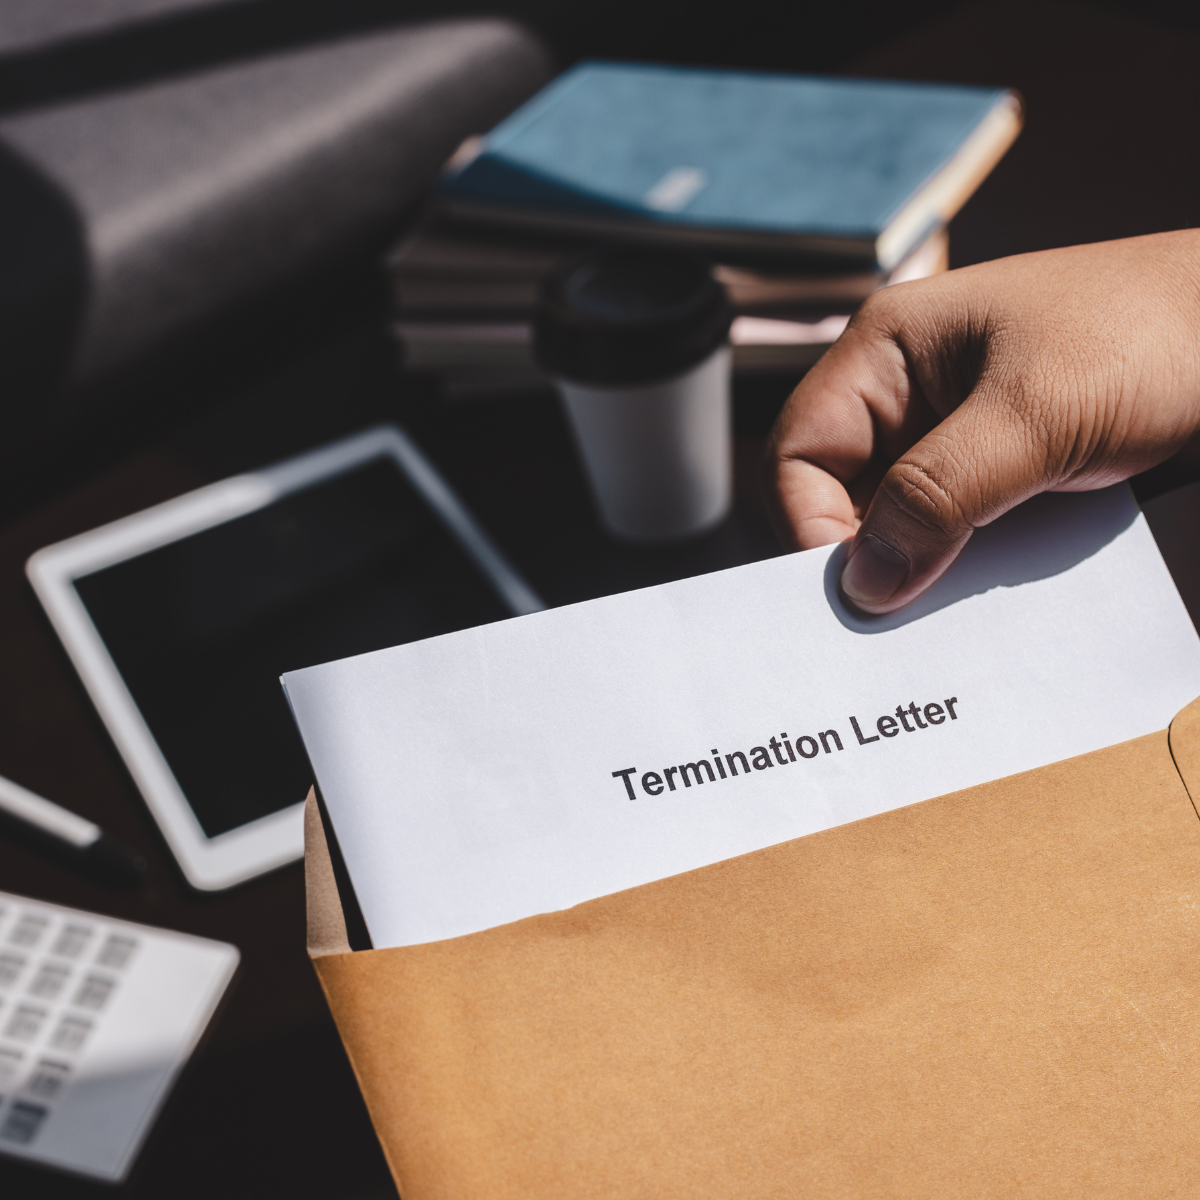 A business person place a termination letter into an envelope for mailing.